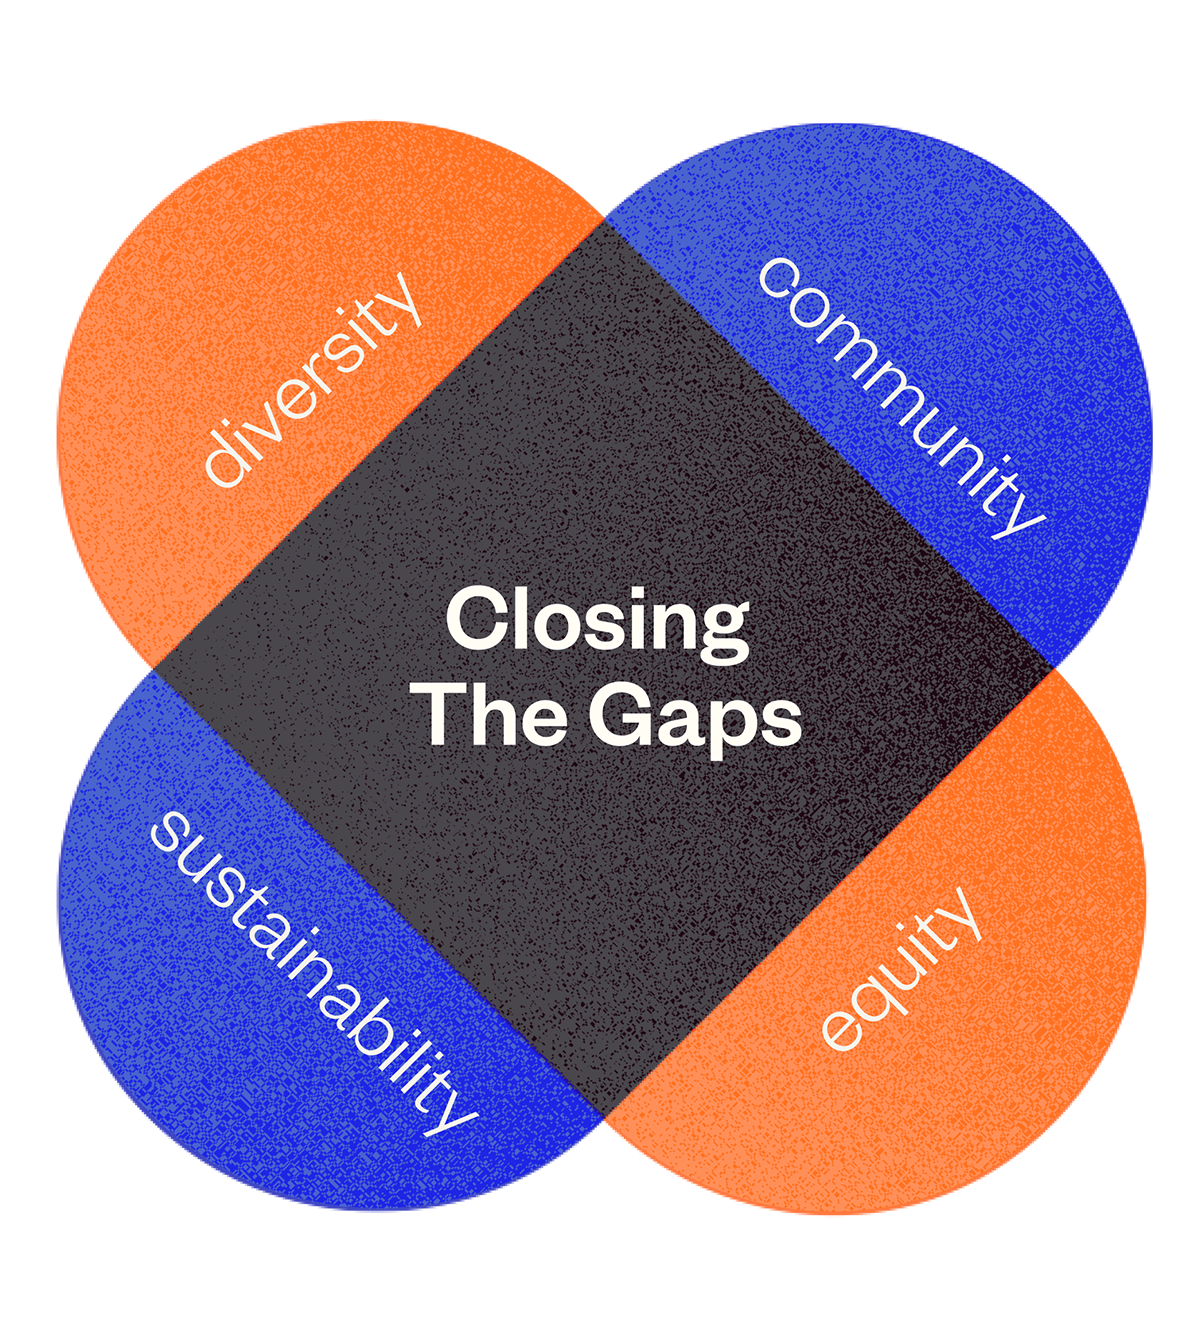 Venn diagram of diversity, equity, and inclusion components relating to closing the gap for employees in business.